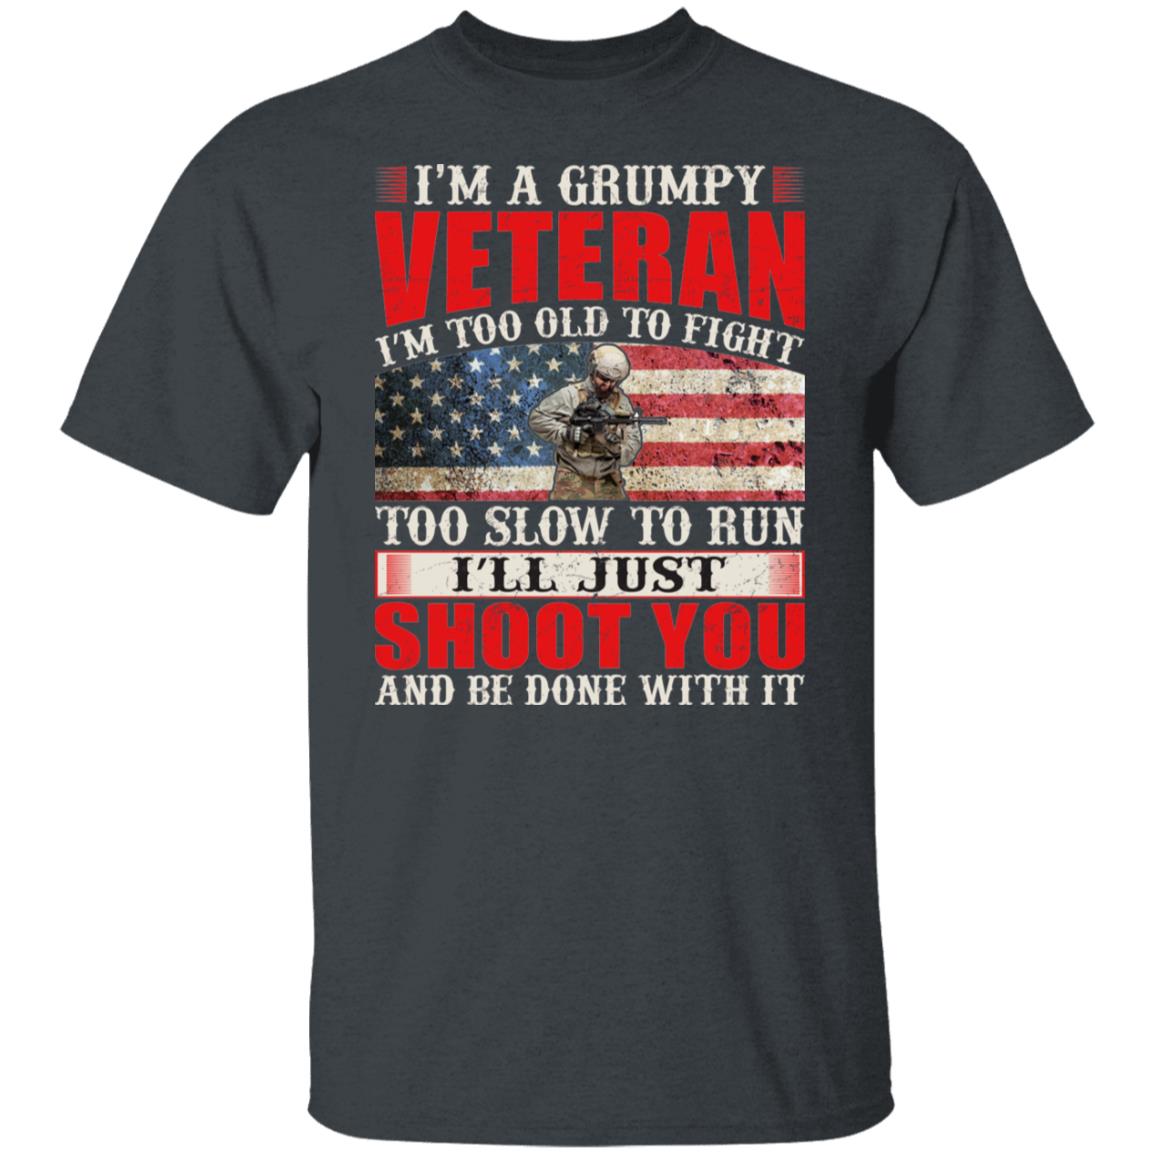 I'm A Grumpy Veteran I'm Too Old to Fight Too Slow To Run Funny Gift Shirt